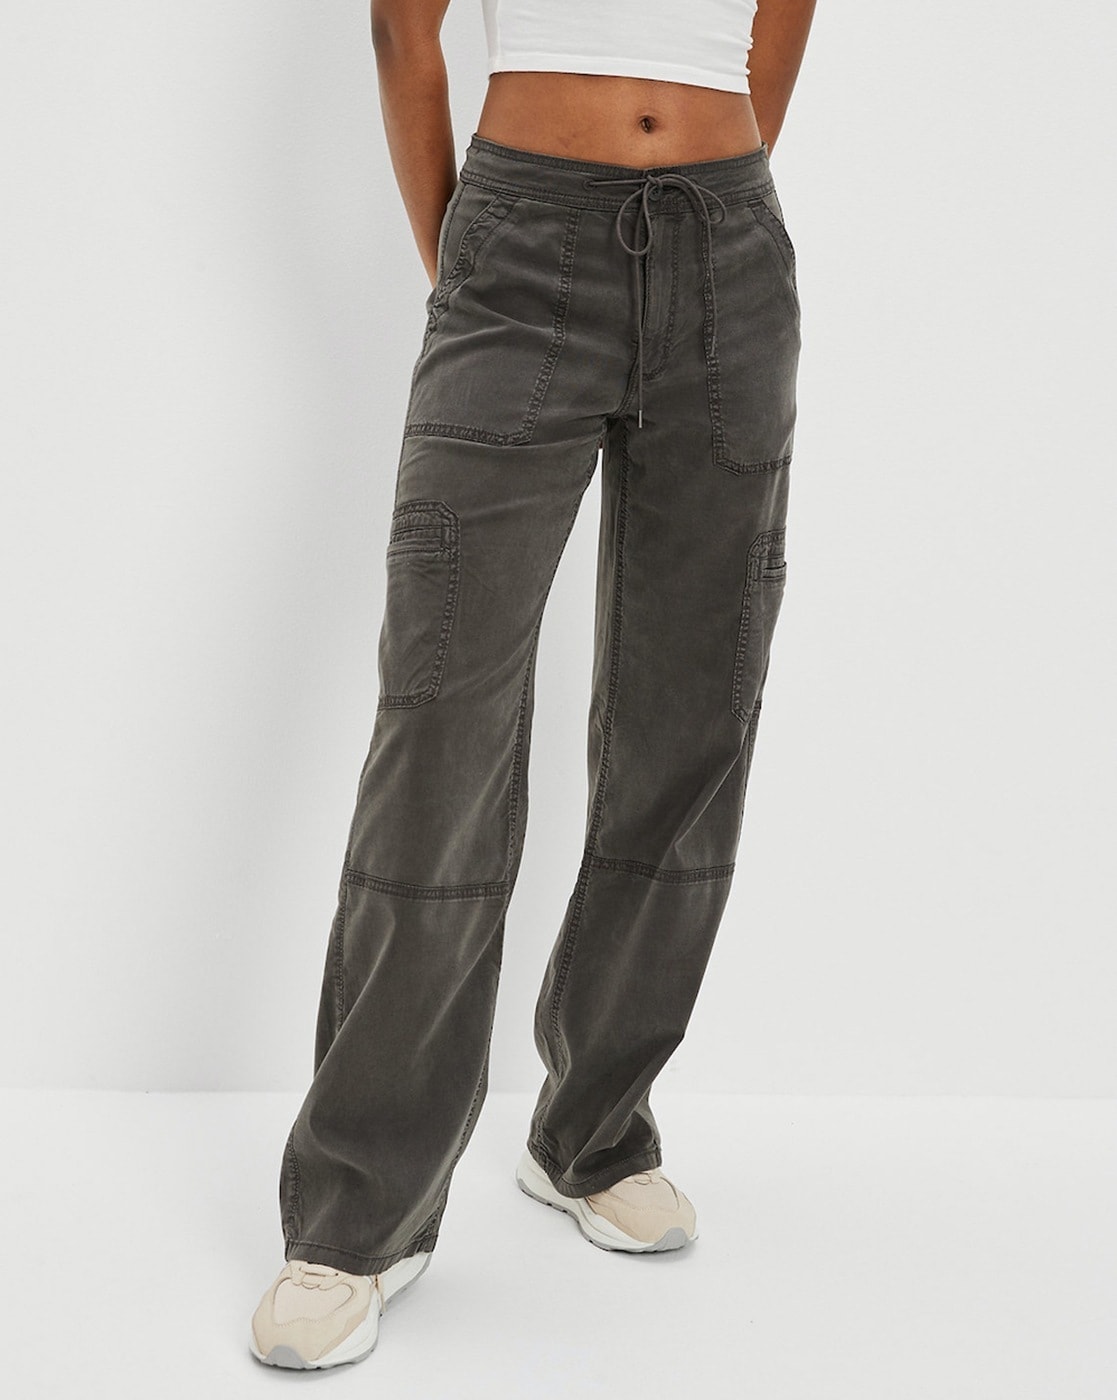 Buy Olive Trousers  Pants for Men by American Eagle Outfitters Online   Ajiocom